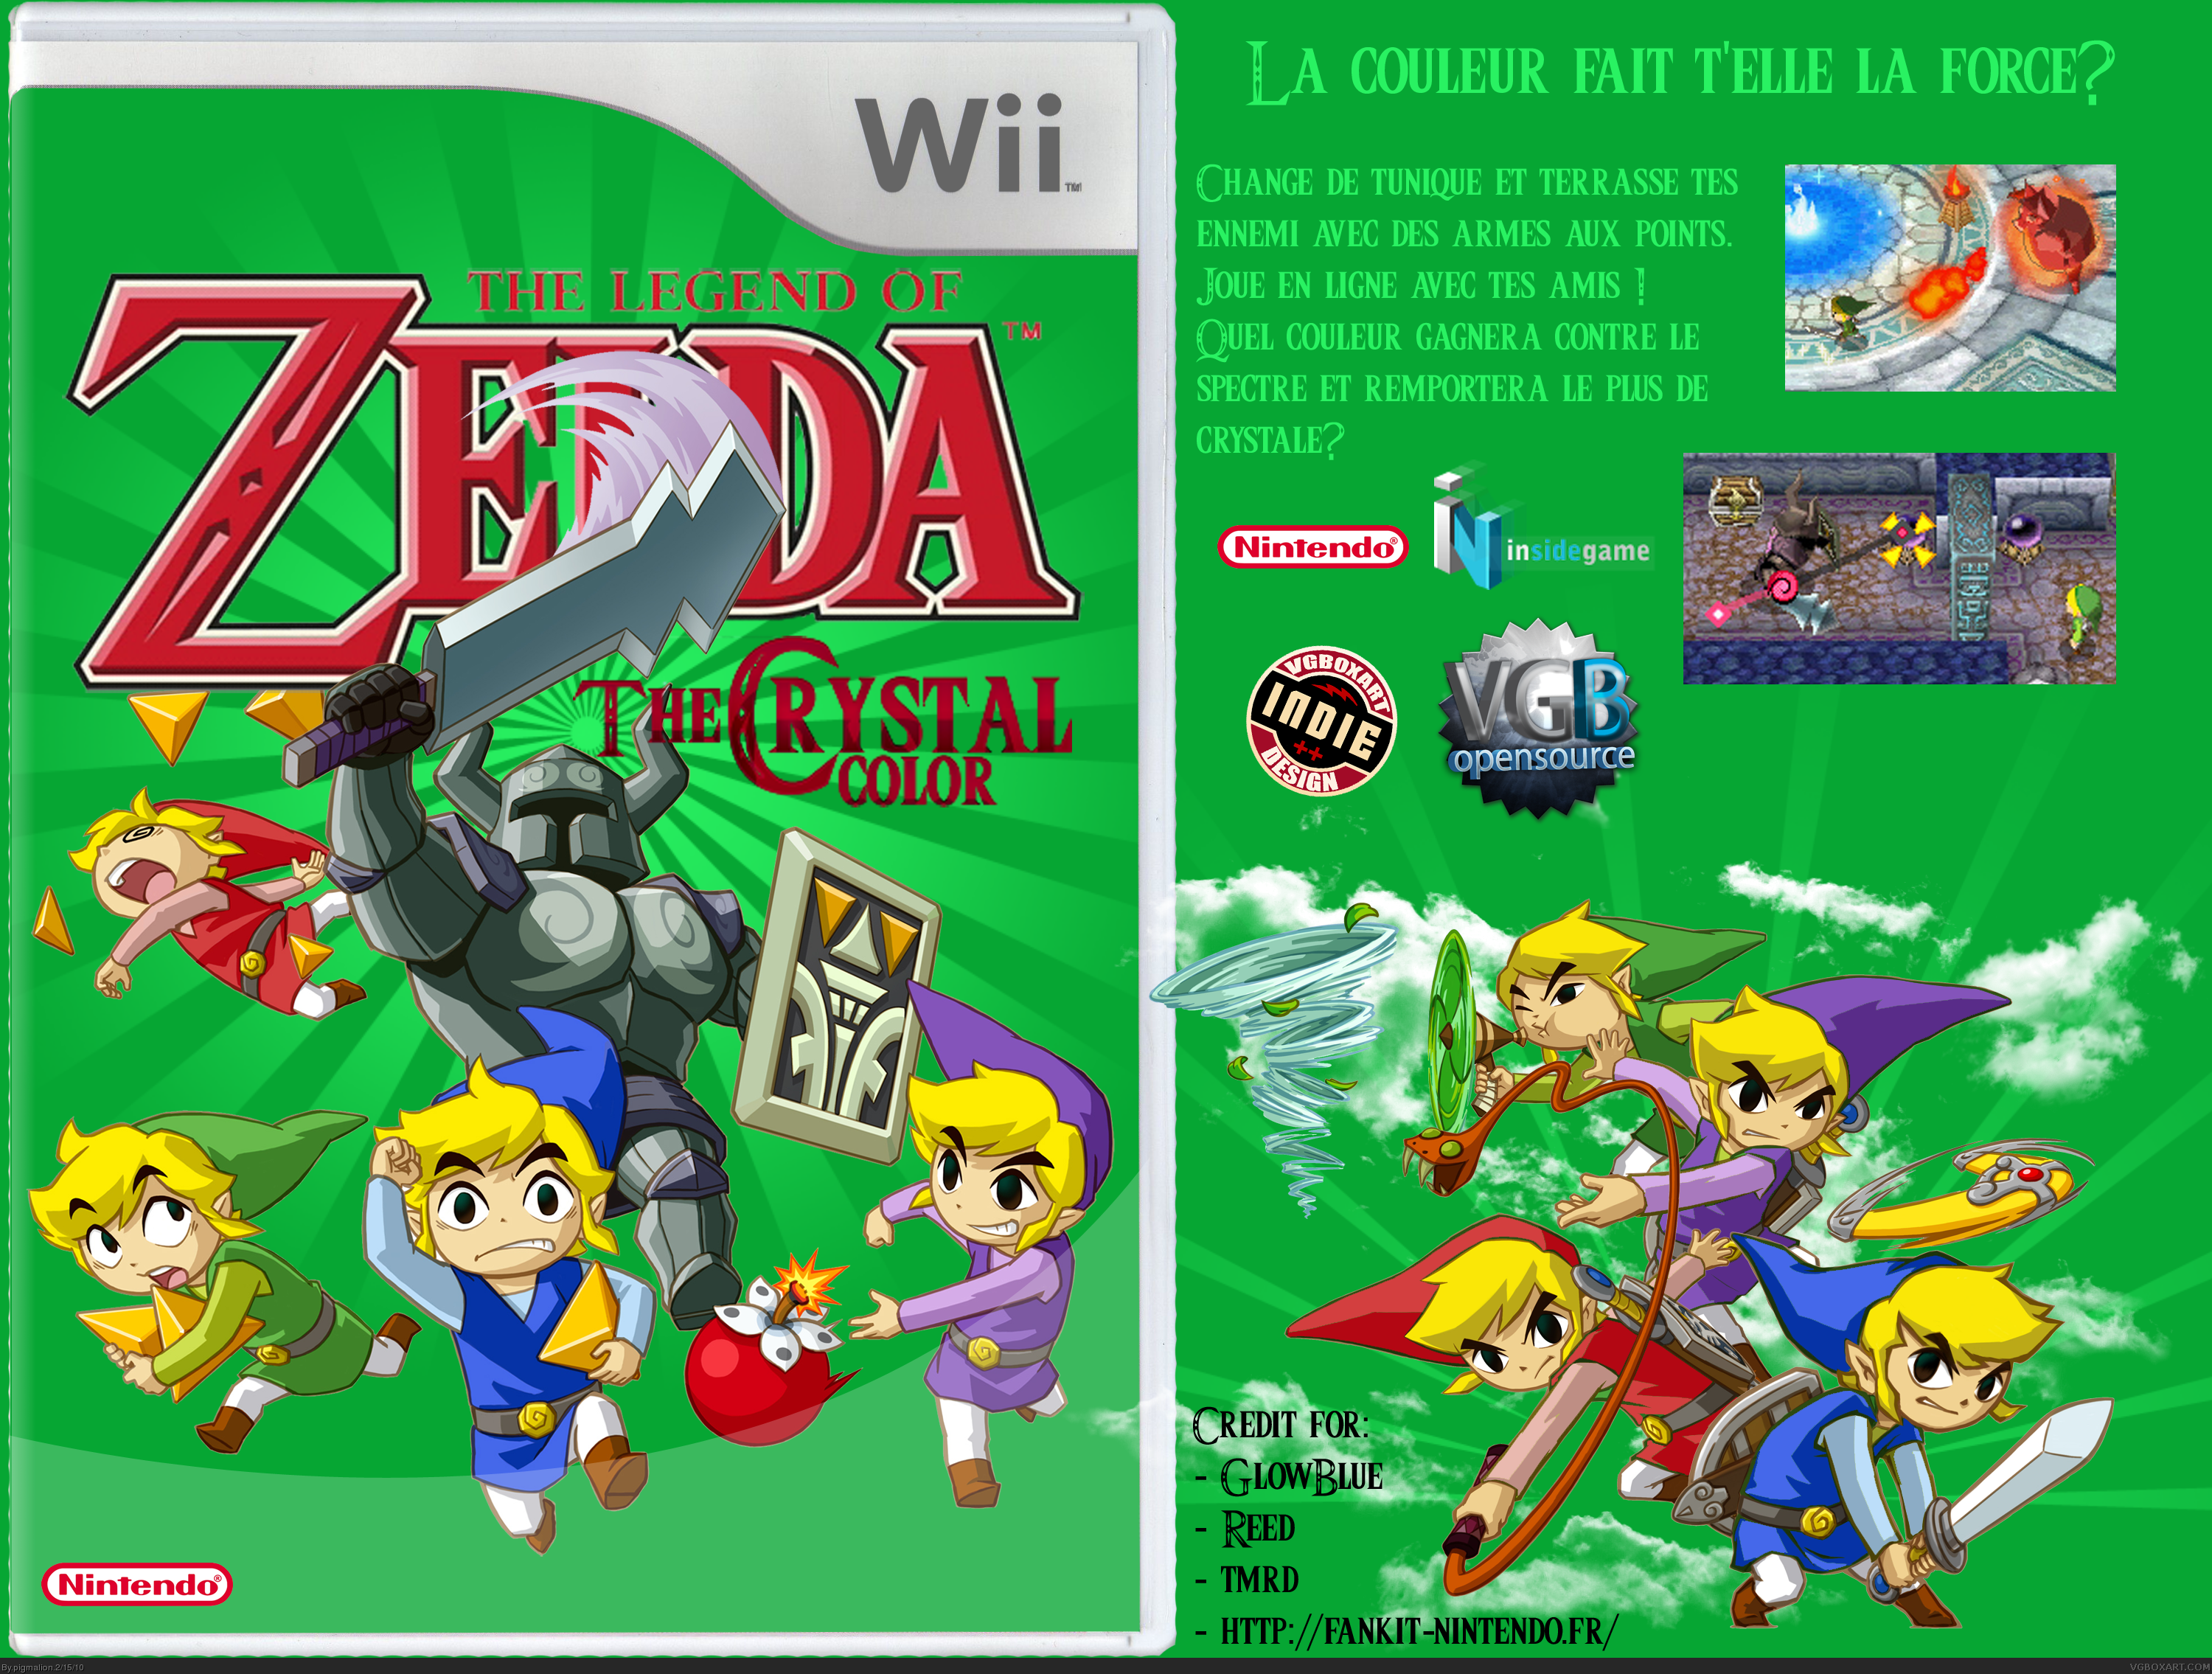 The Legend of Zelda: The Crystal Color box cover